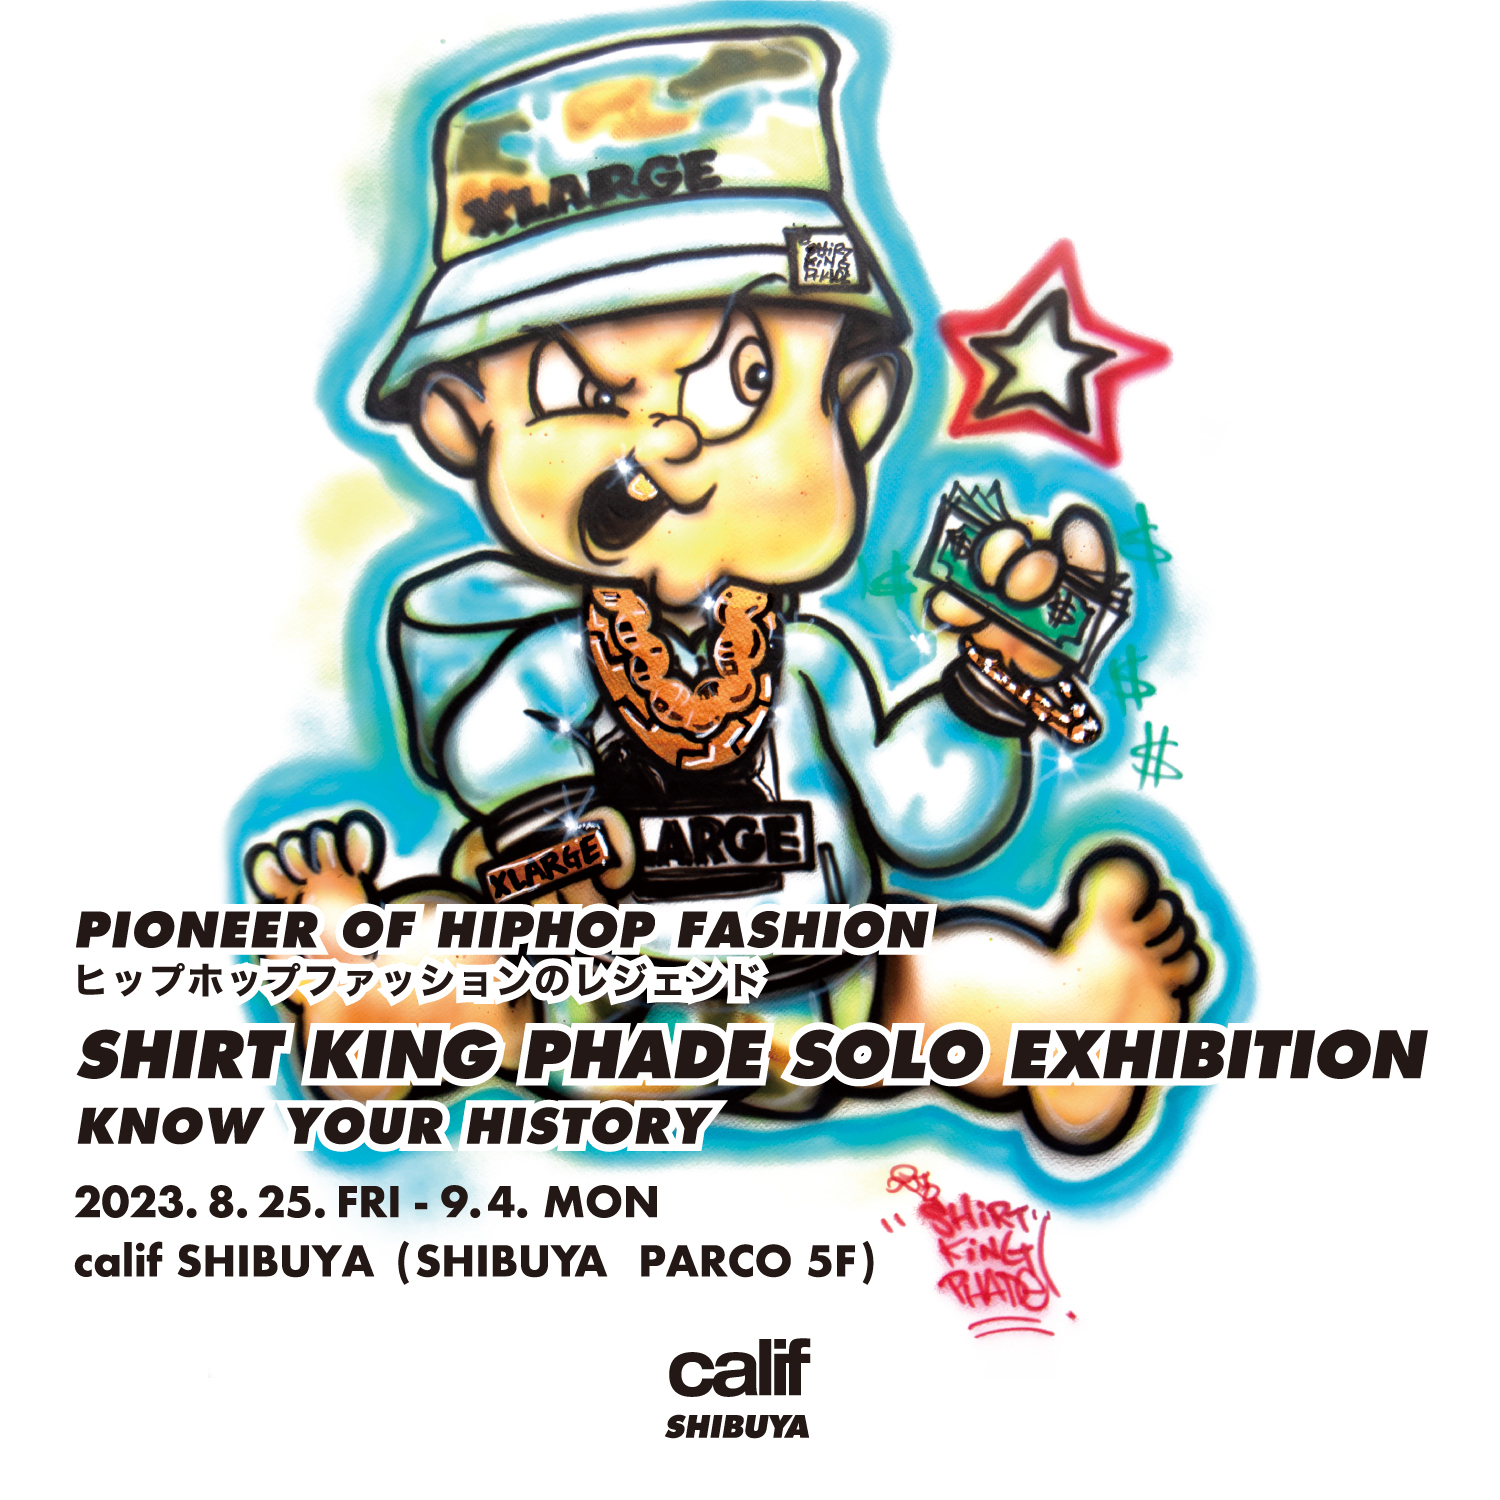 SHIRT KING PHADE SOLO EXHIBITION “KNOW YOUR HISTORY”